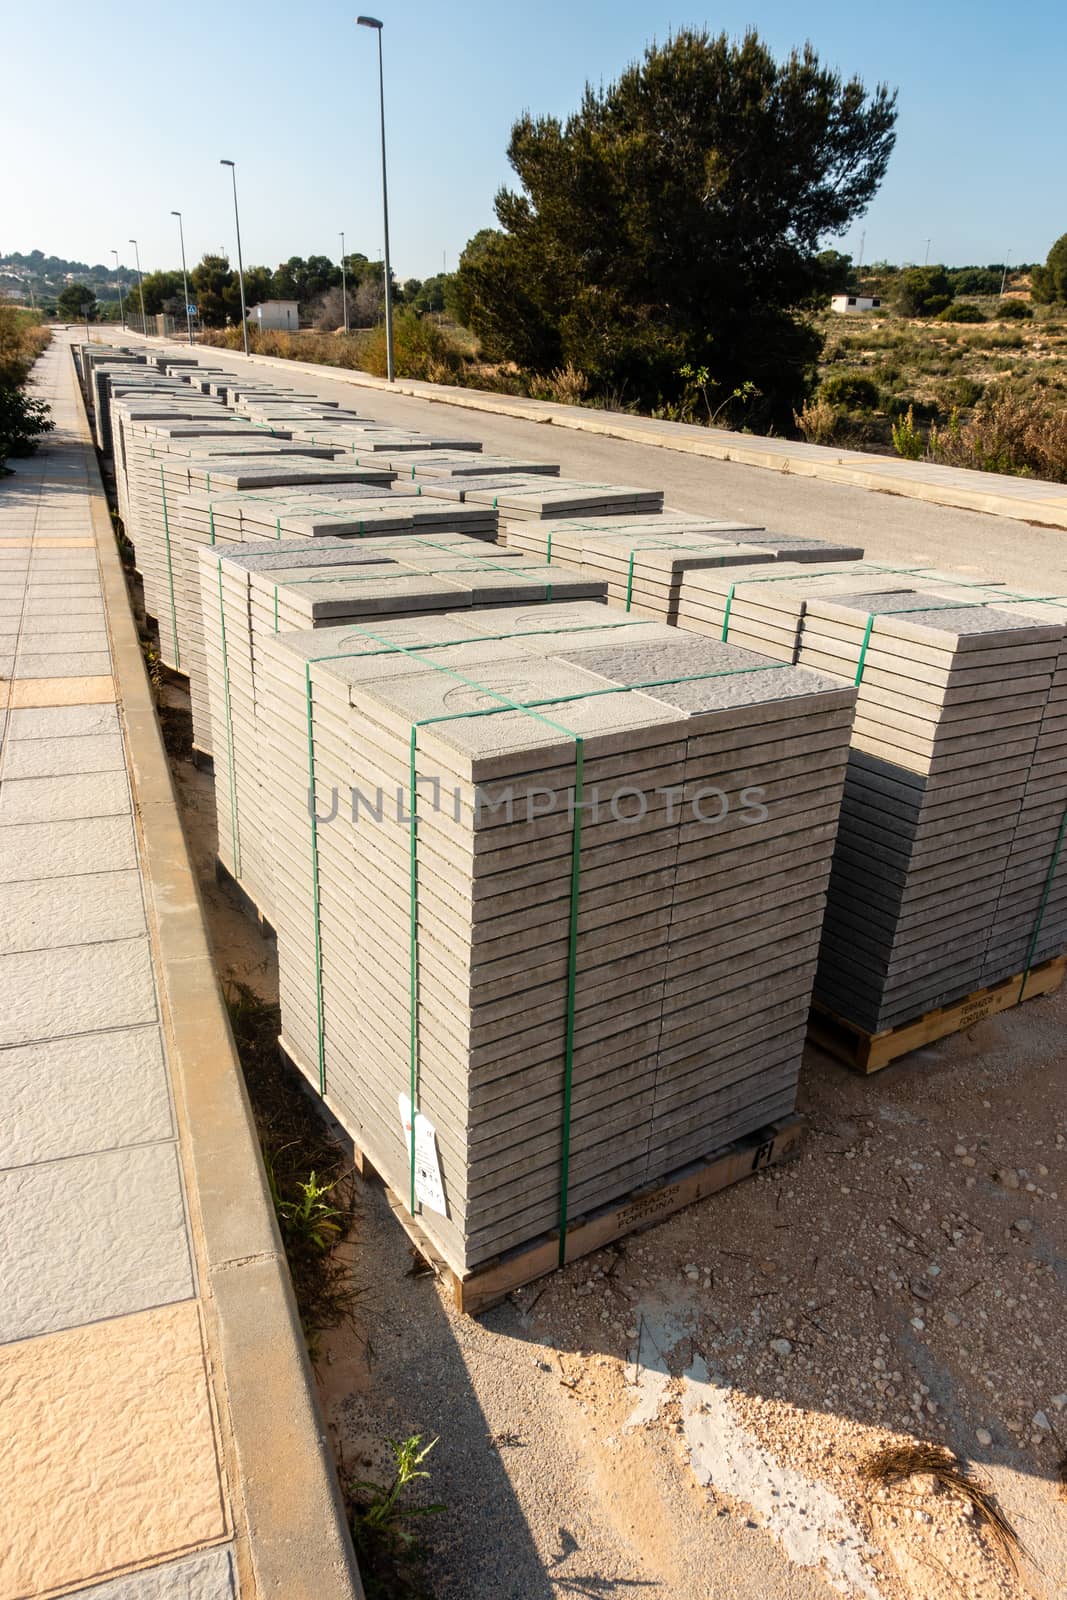 paving slabs stacked at roadside ready for use